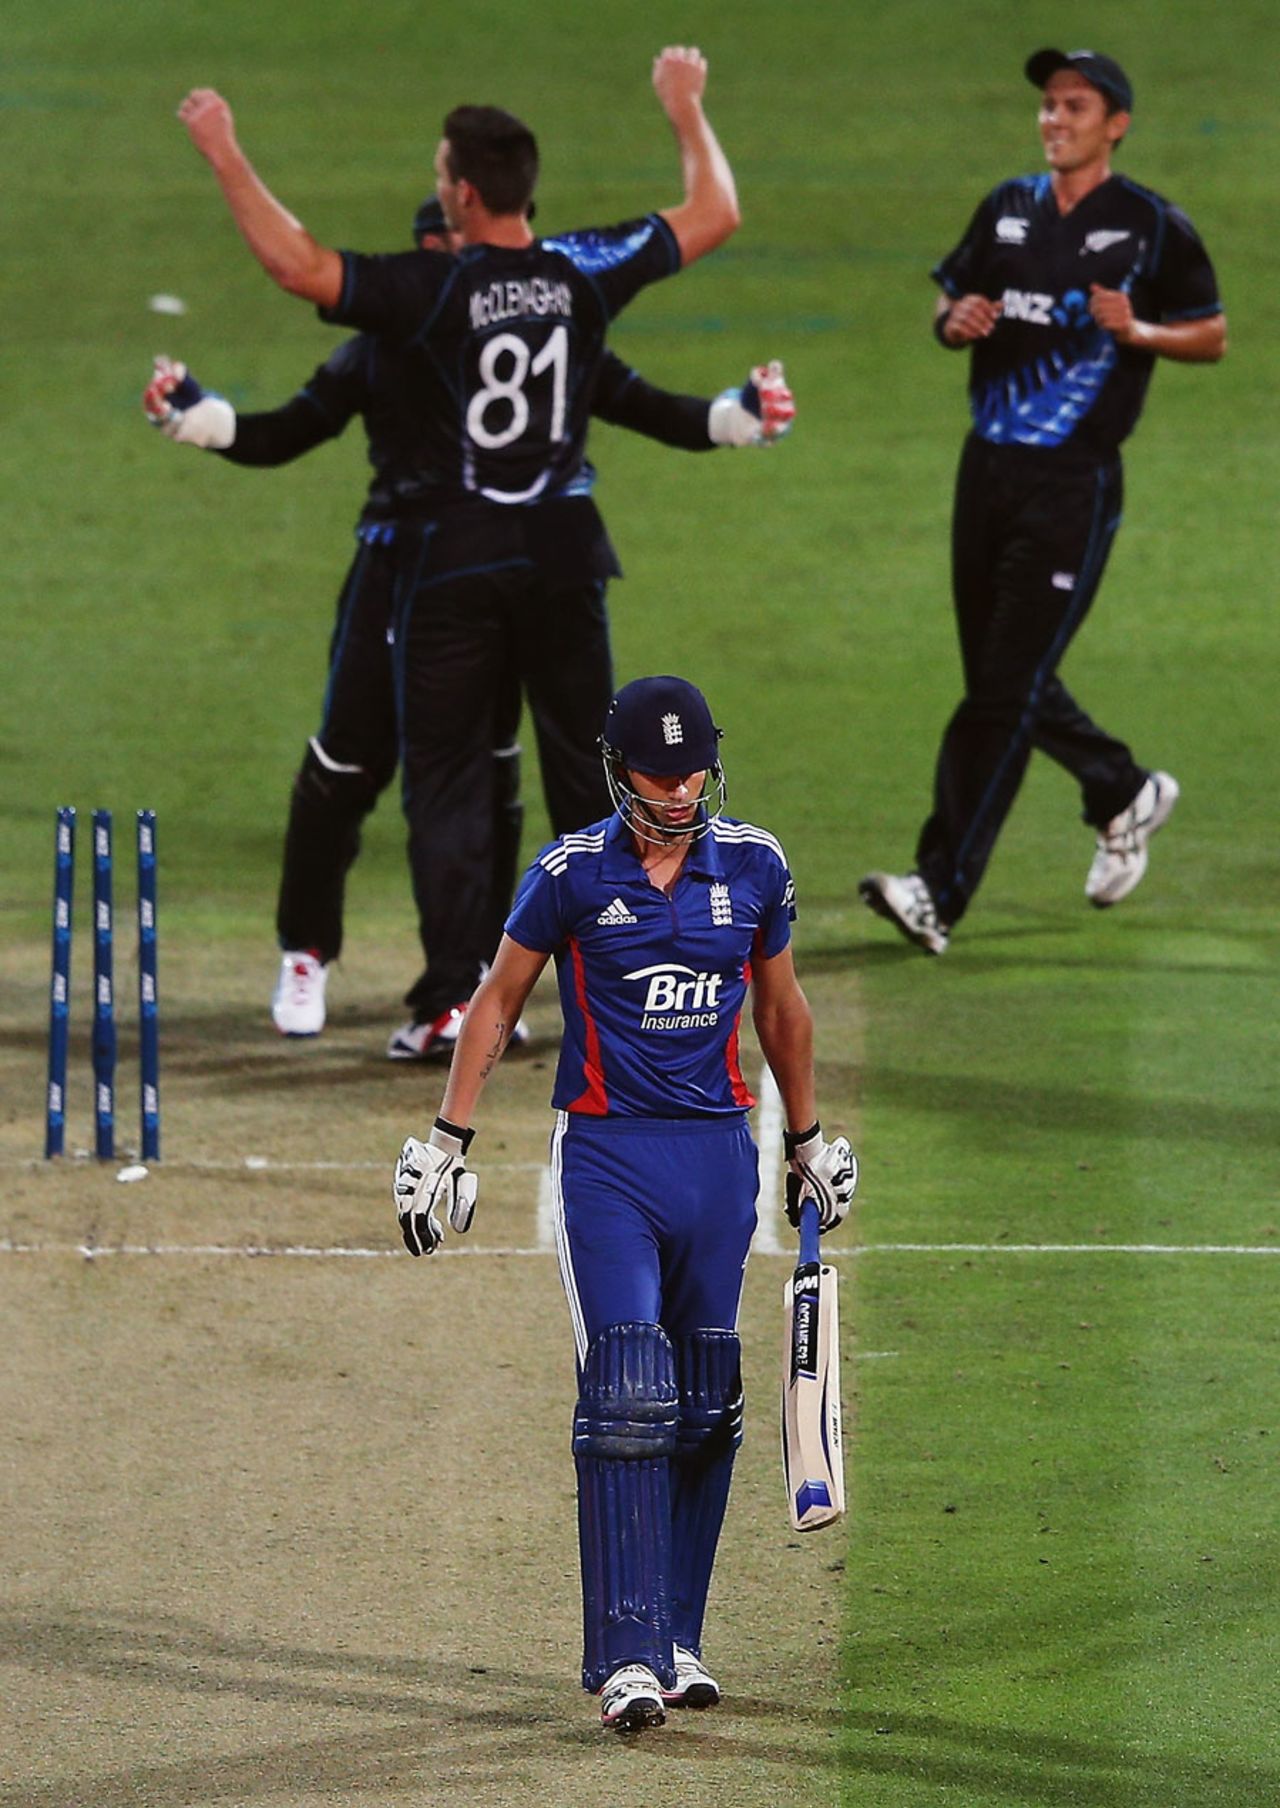 Alex Hales was bowled by Mitchell McClenaghan in the second over, New Zealand v England, 2nd T20, Hamilton, February 12, 2013